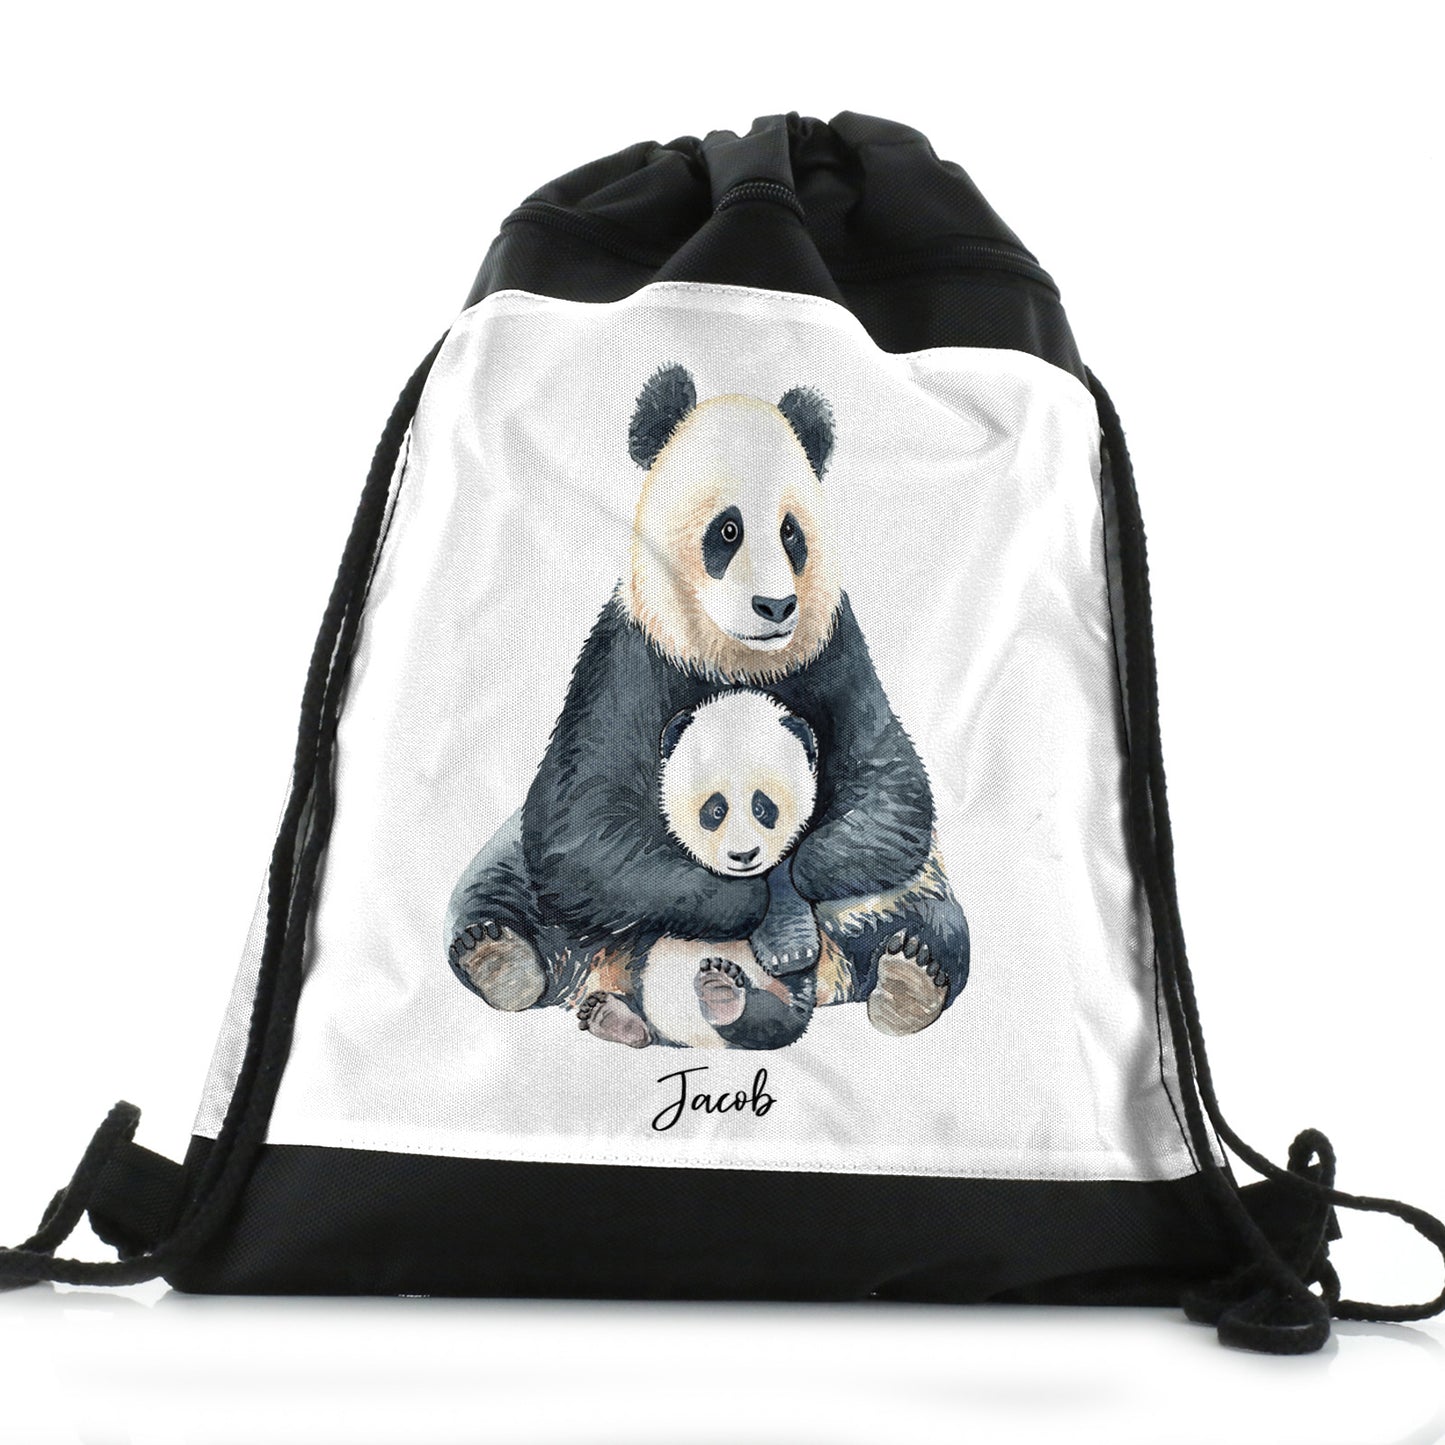 Personalised Drawstring Backpack with Welcoming Text and Relaxing Mum and Baby Pandas